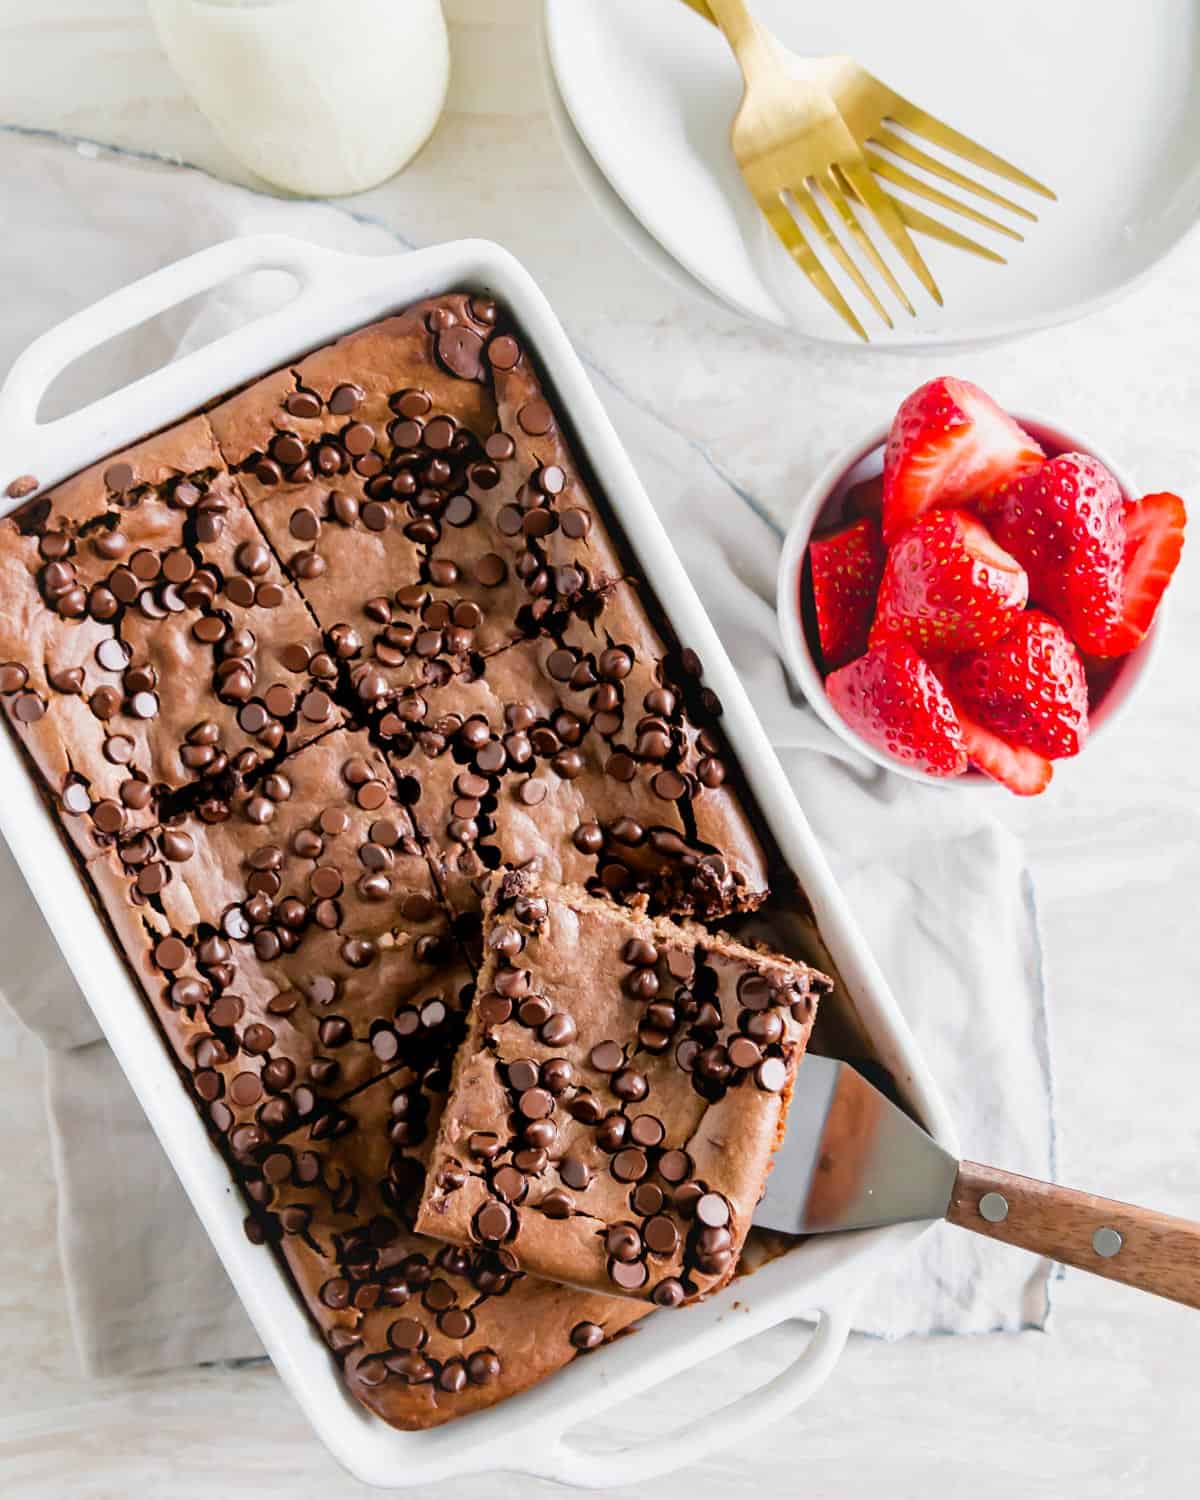 Chocolate baked oats in a baking dish with one slice on a spatula served with fresh strawberries.